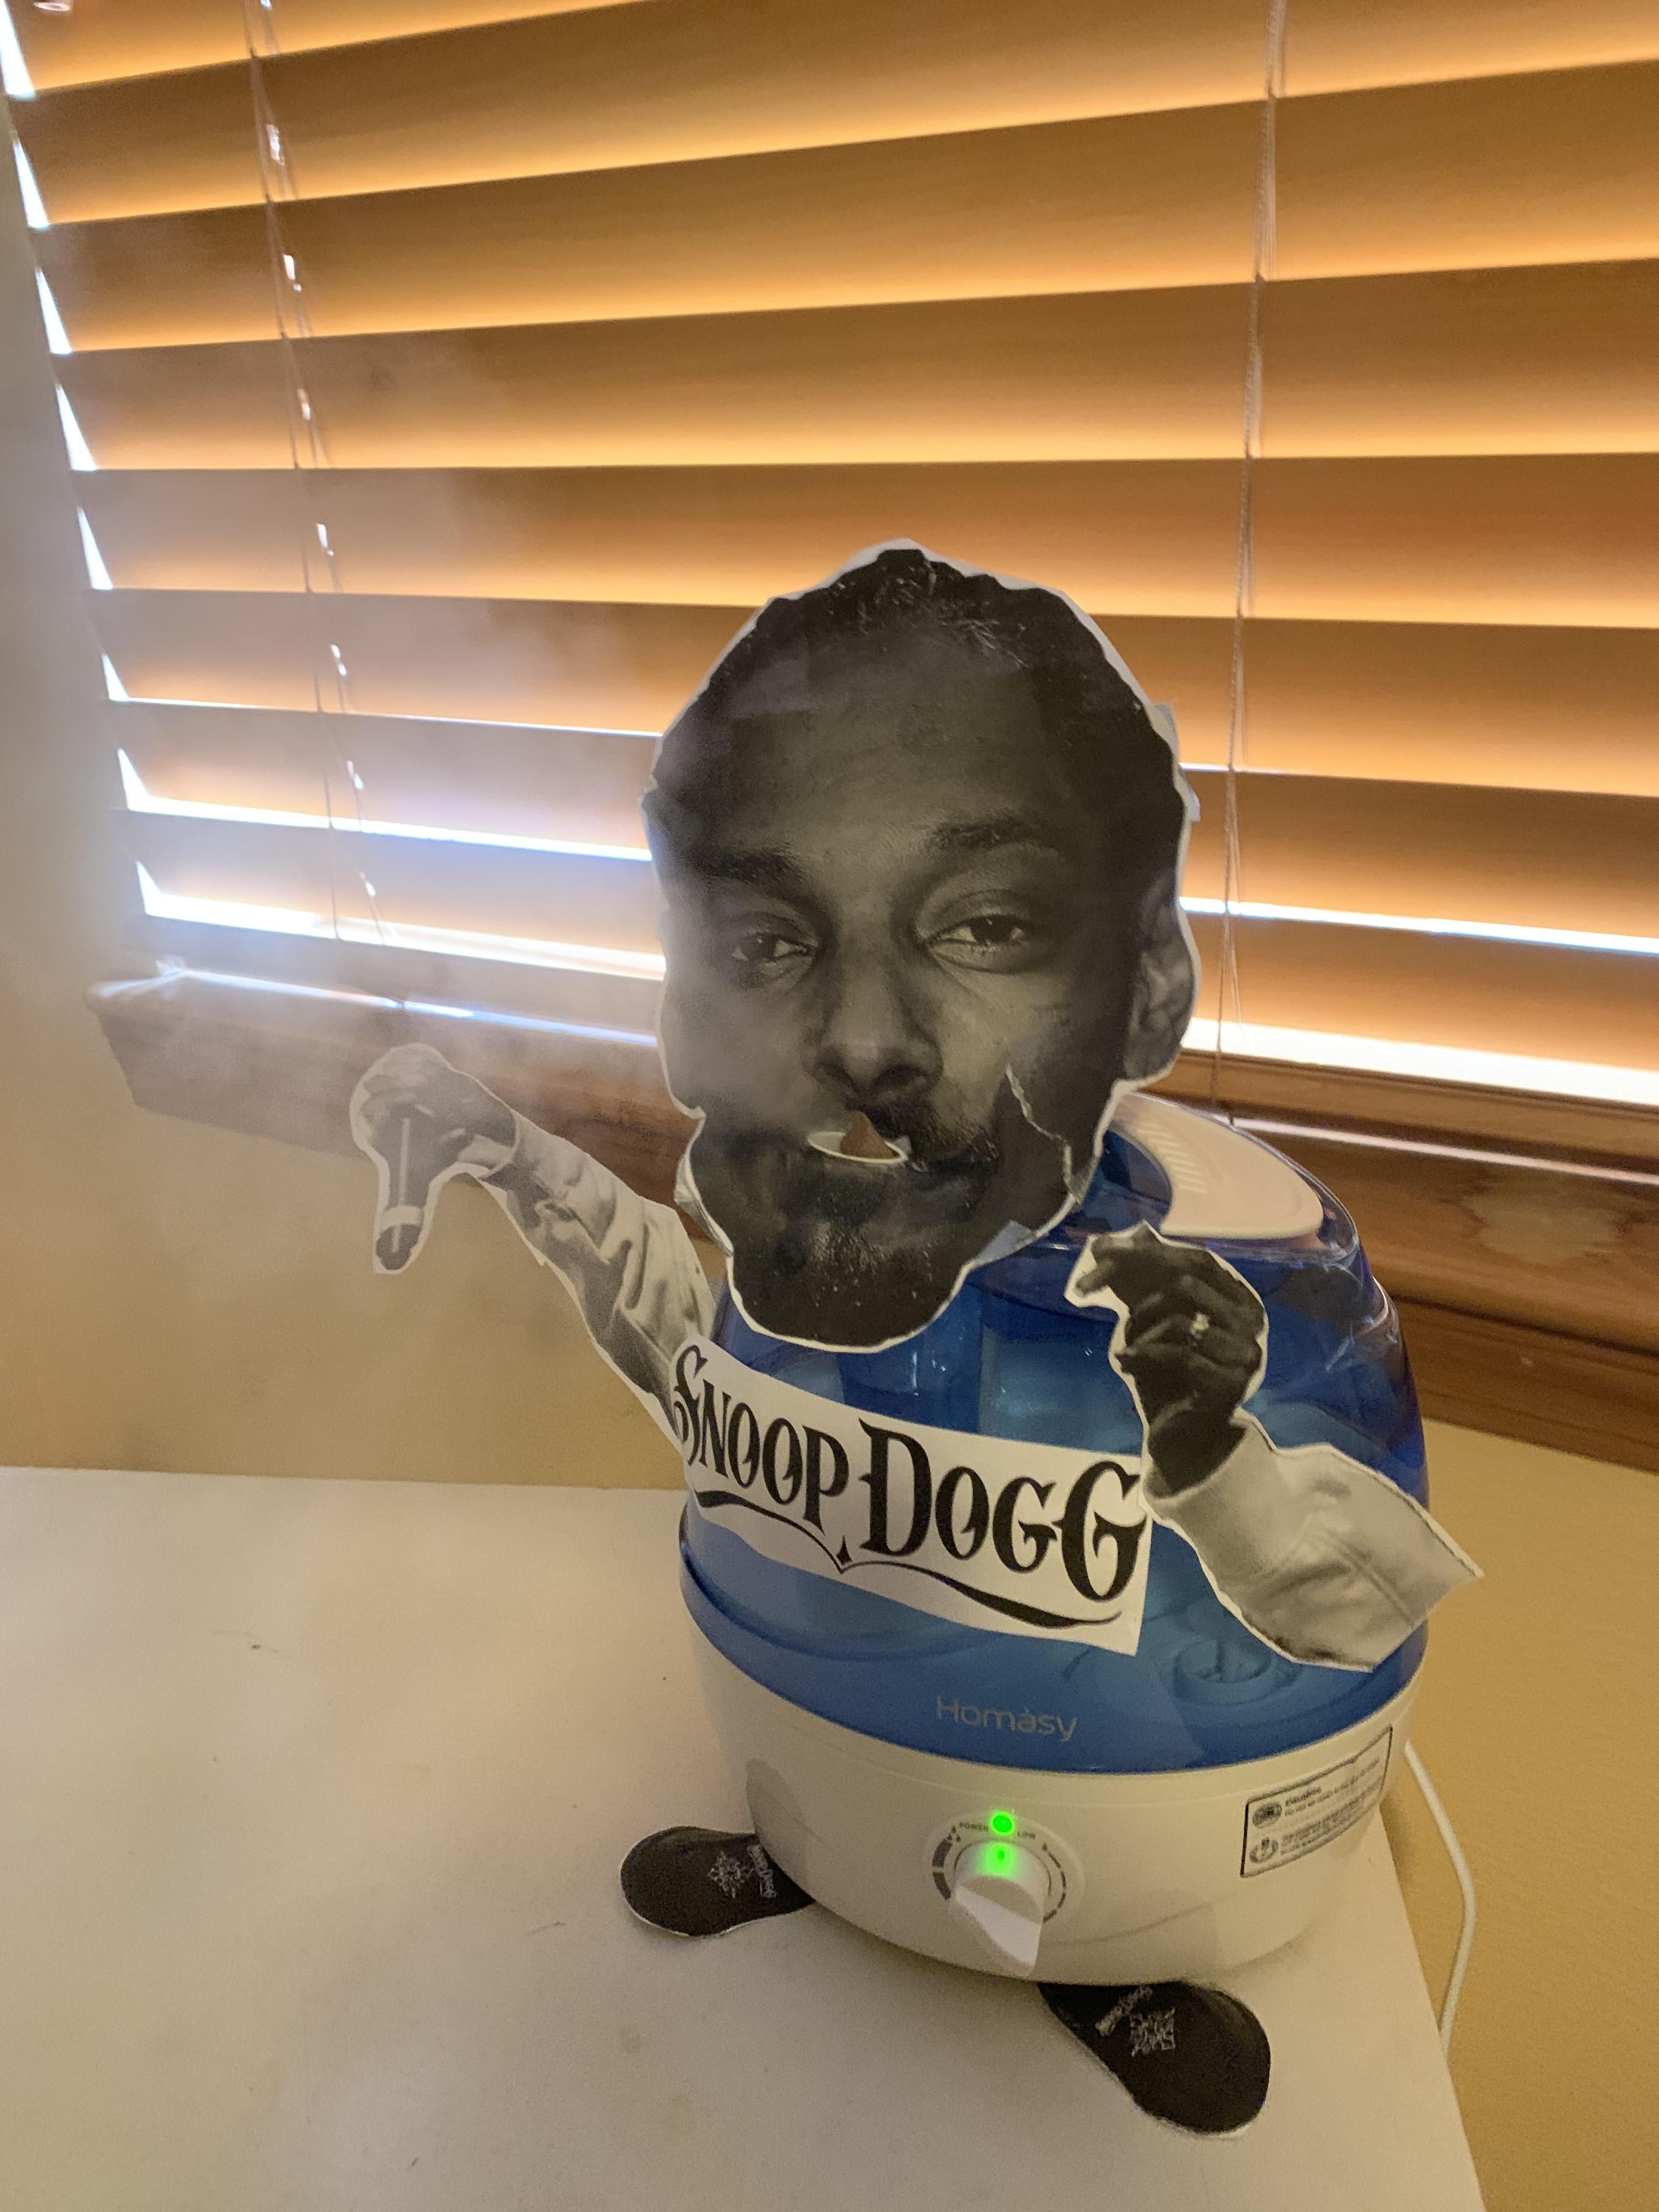 I made my diffuser into snoop dogg.